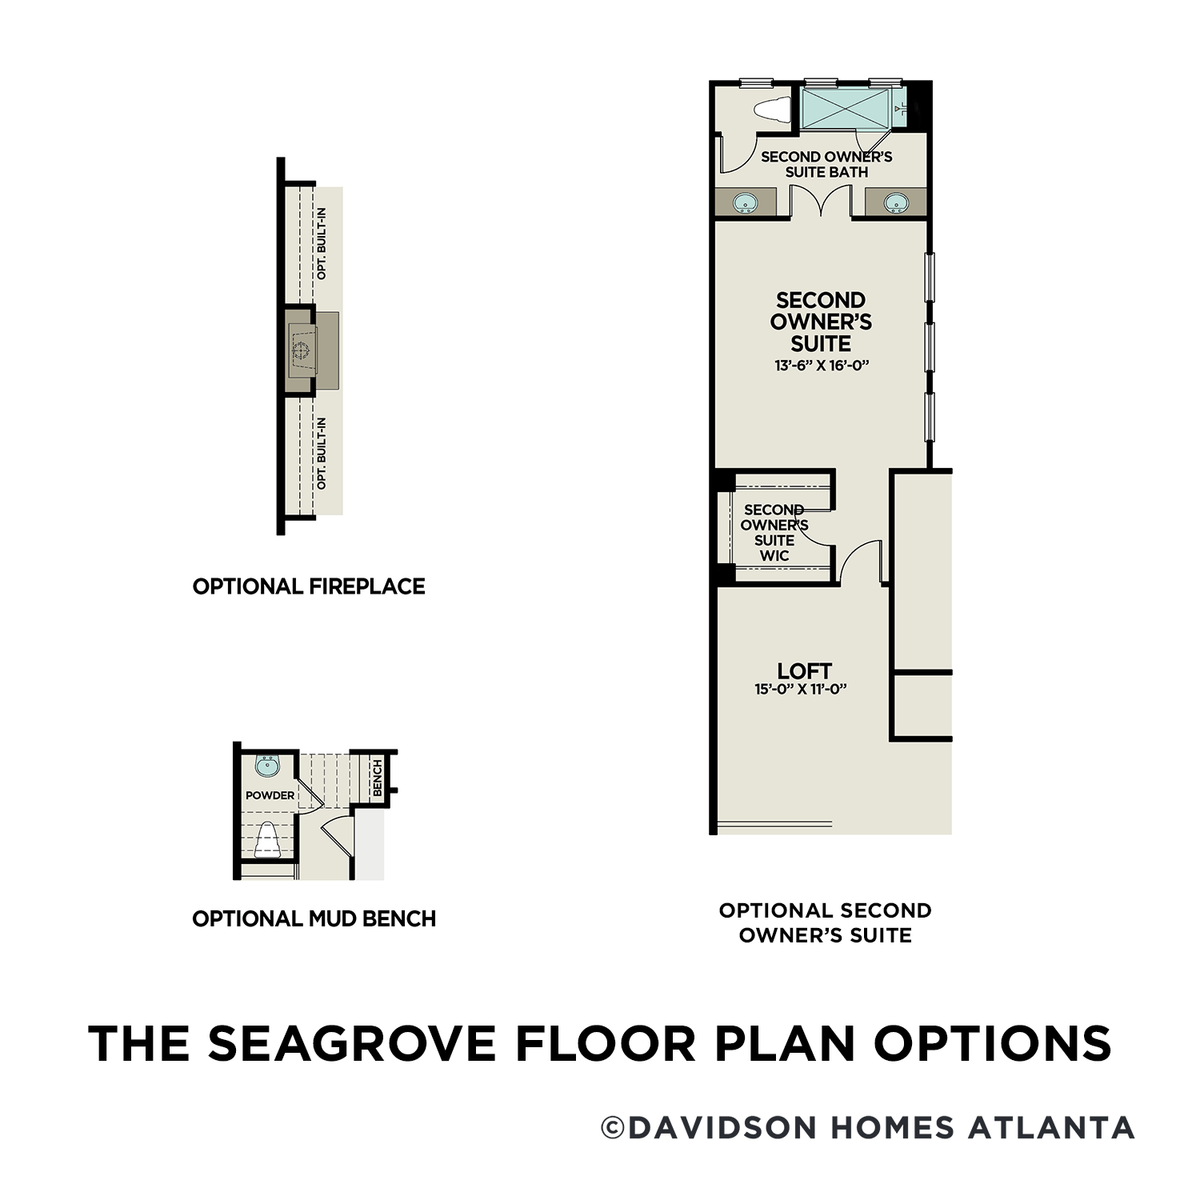 3 - The Seagrove C floor plan layout for 756 Stickley Oak Way in Davidson Homes' The Village at Towne Lake community.